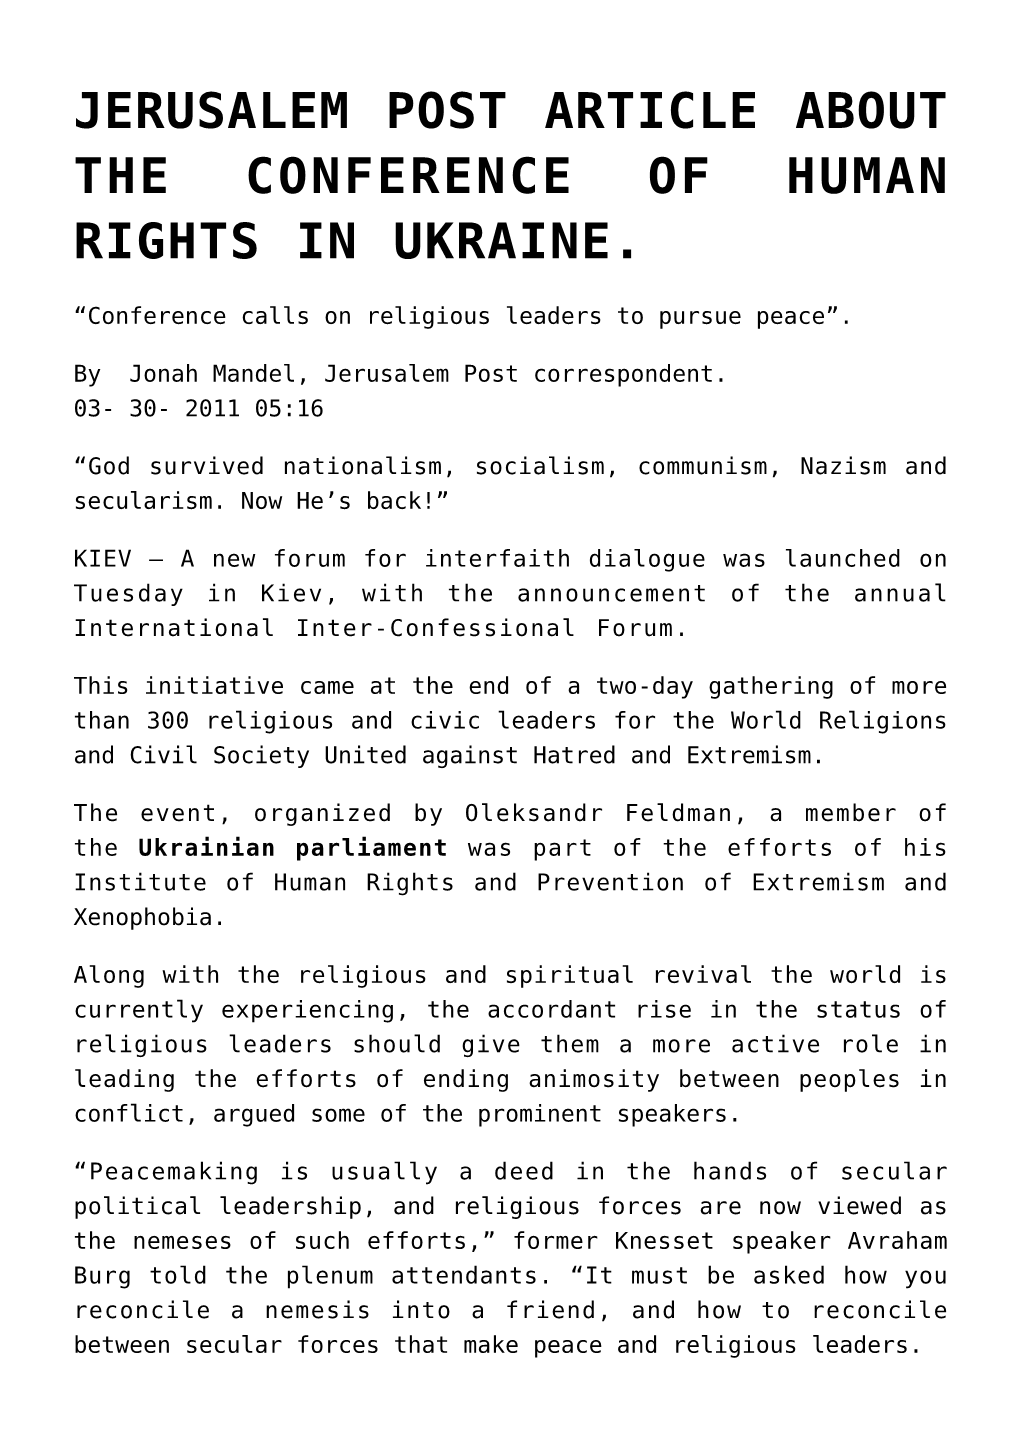 Jerusalem Post Article About the Conference of Human Rights in Ukraine